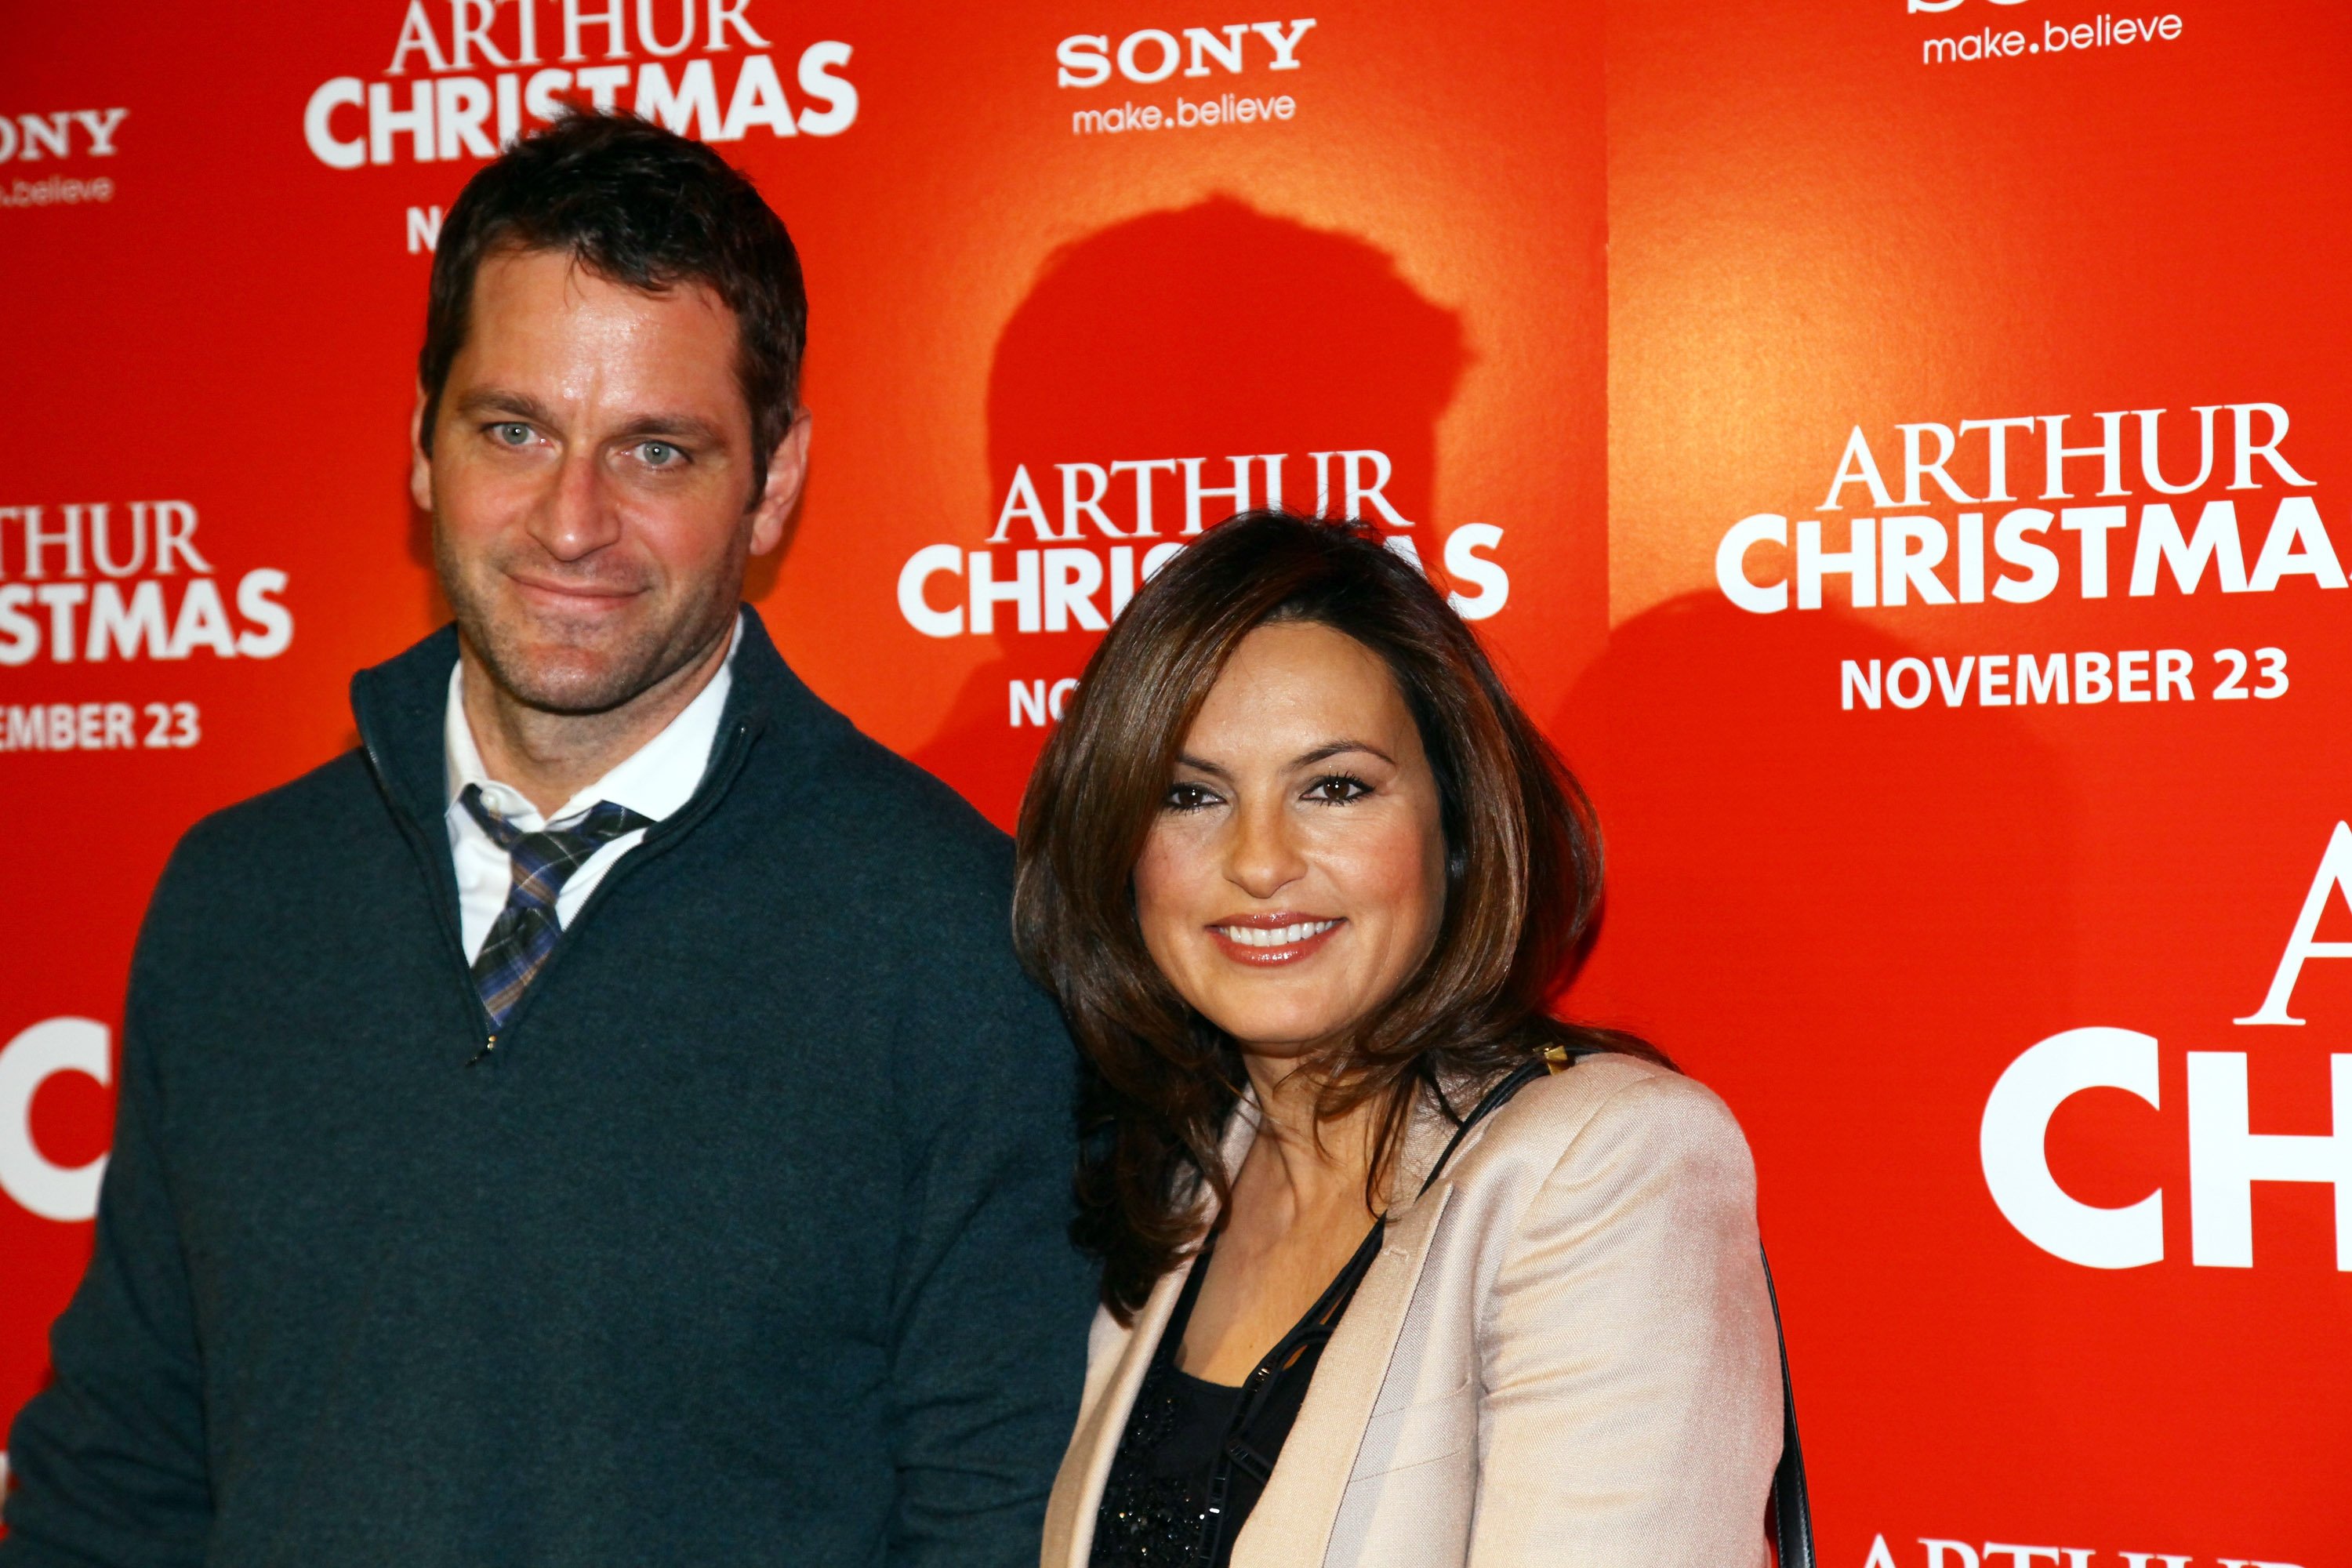 ‘Law & Order: SVU’: The Gift Mariska Hargitay Received From Peter Hermann That Made Her Cry